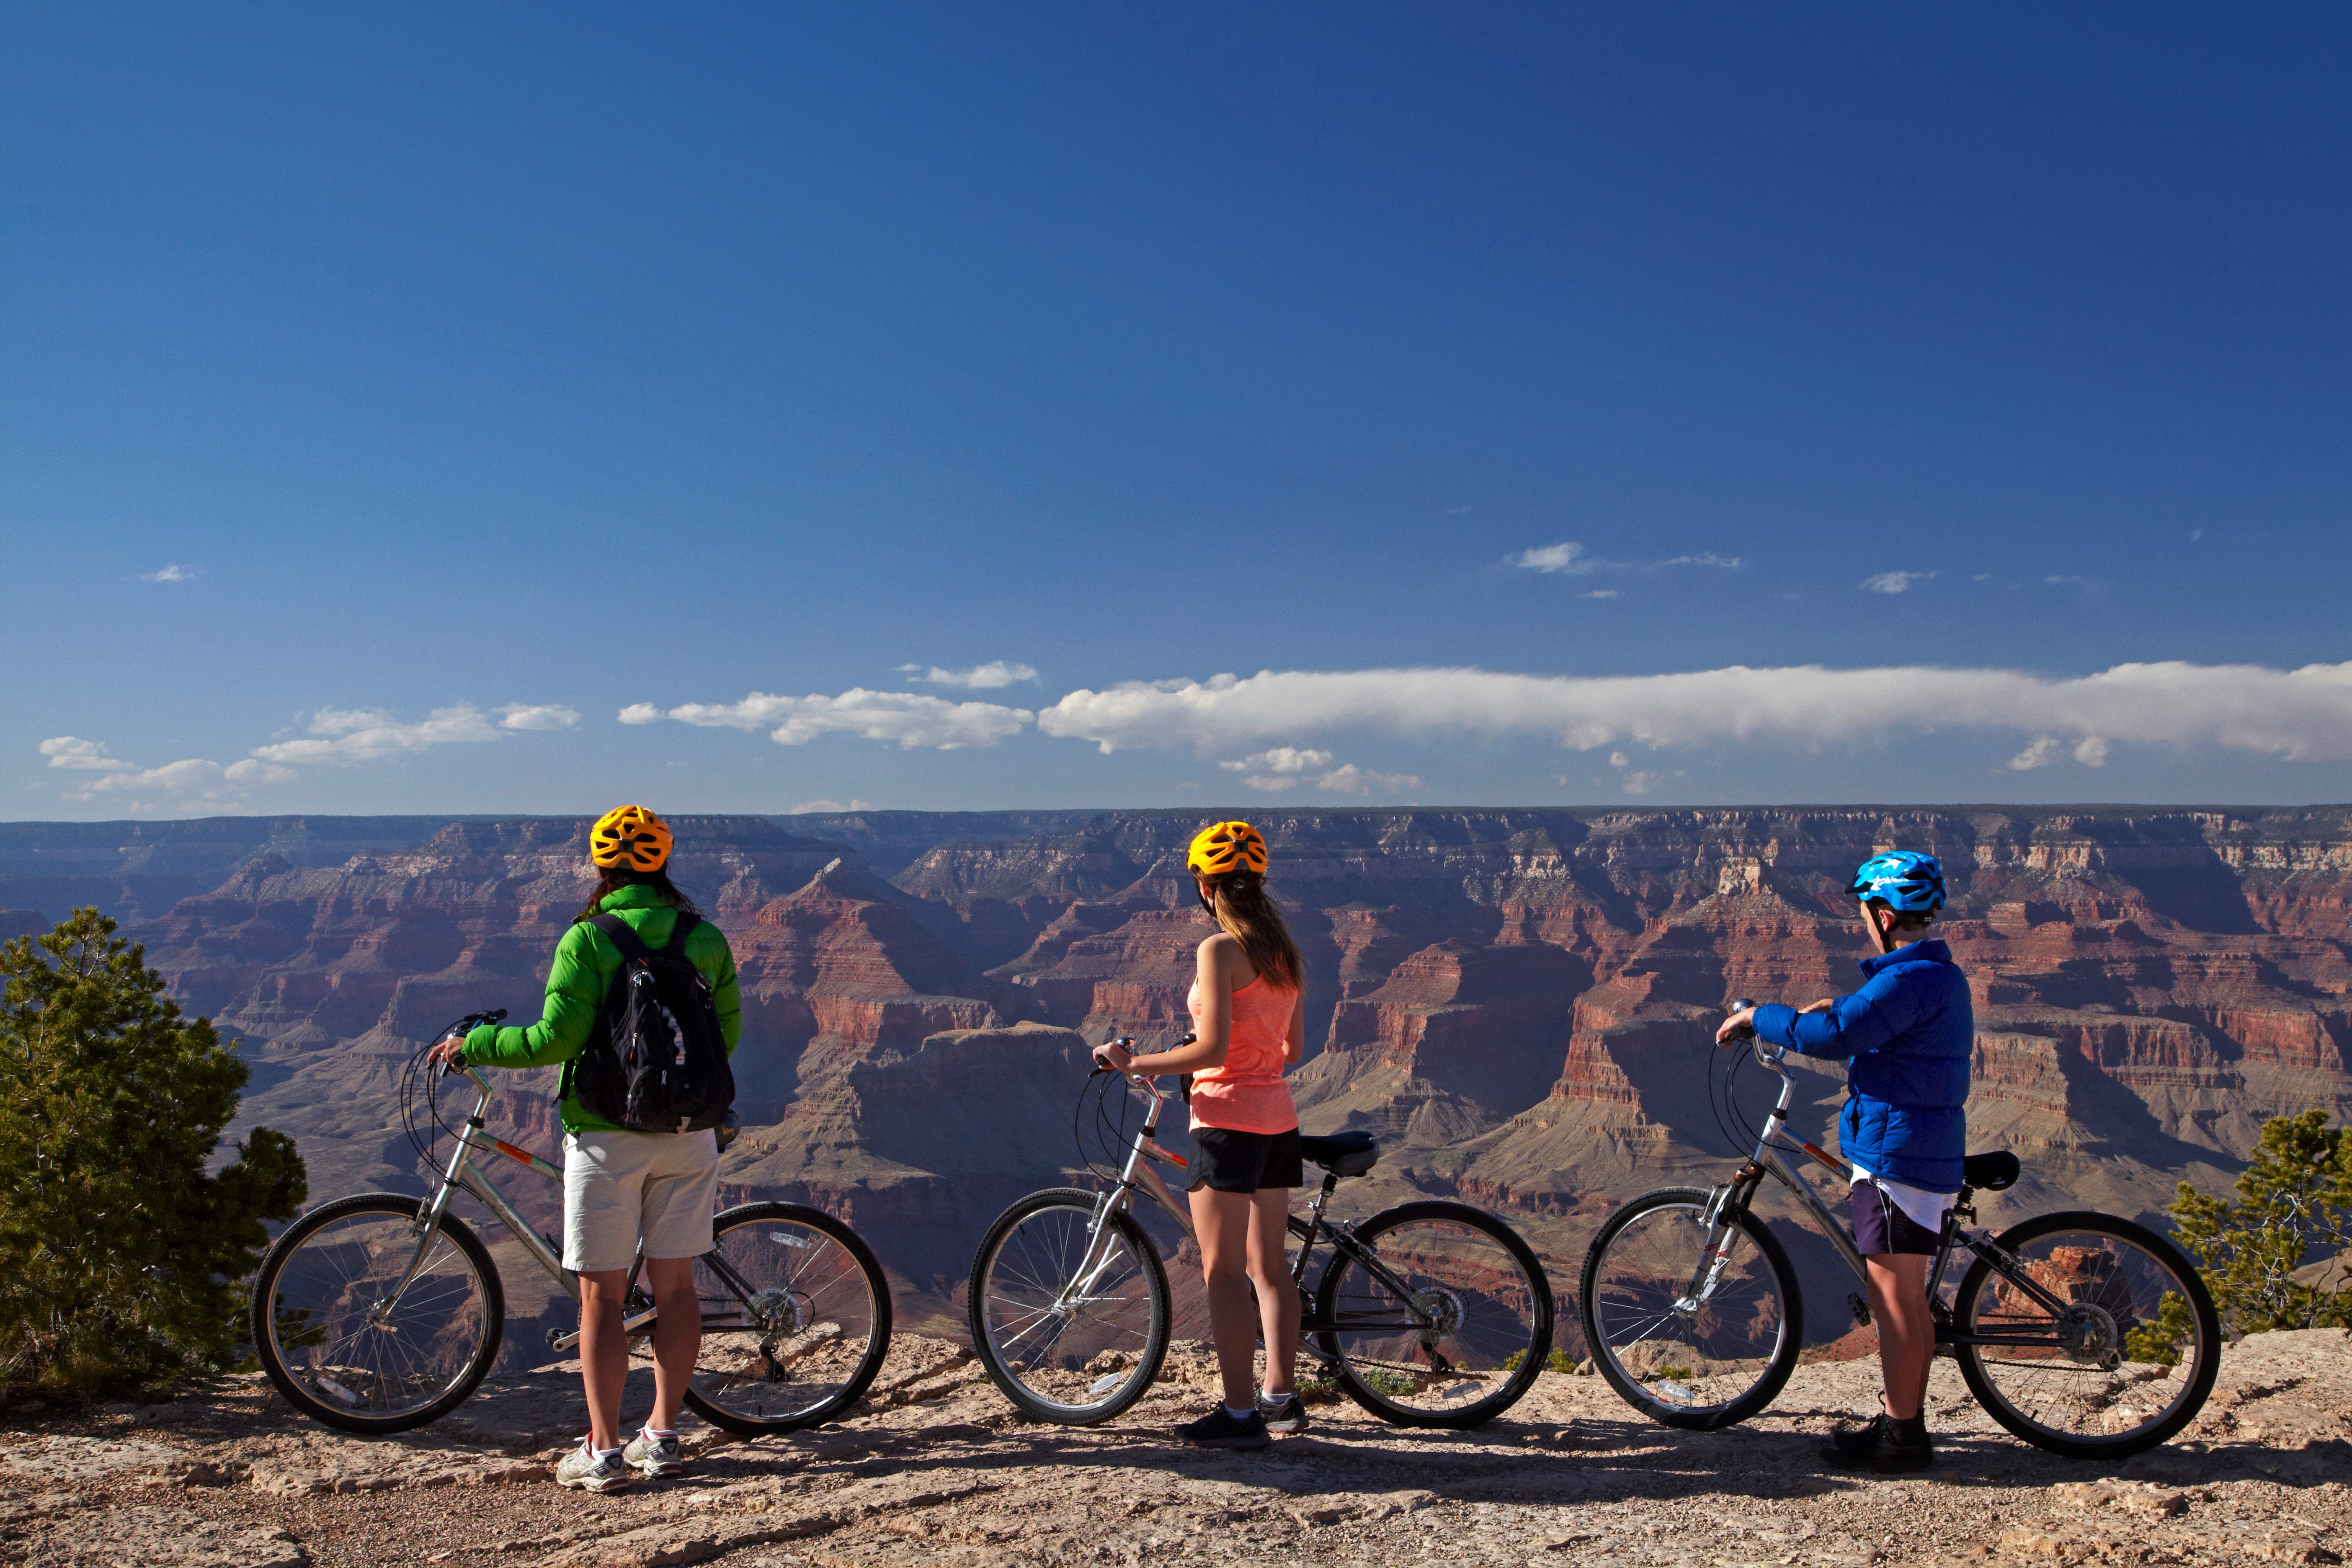 A tour on two wheels is one of the best ways to experience more of the Grand Canyon. Image by Danita Delimont / Getty